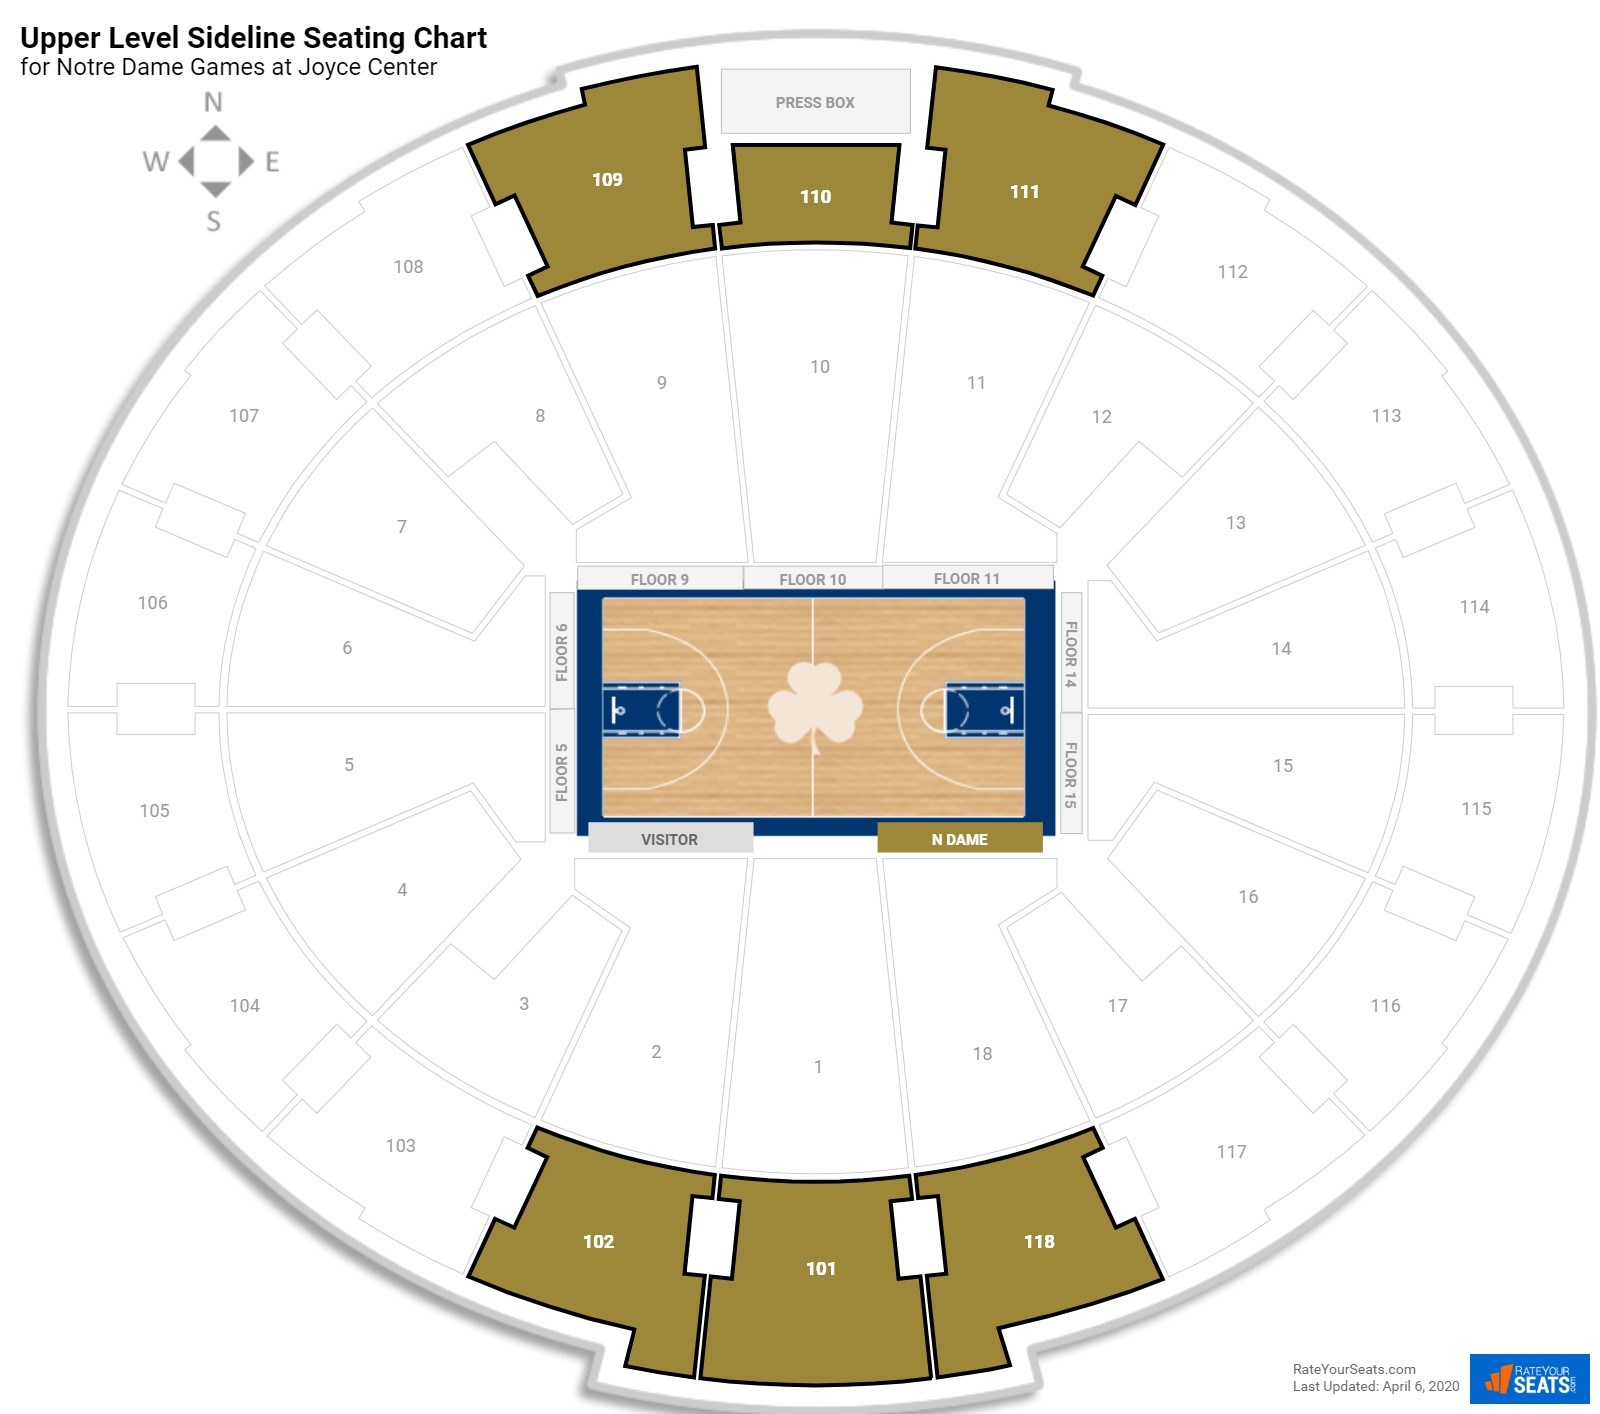 Joyce Center (Notre Dame) Seating Guide - RateYourSeats.com